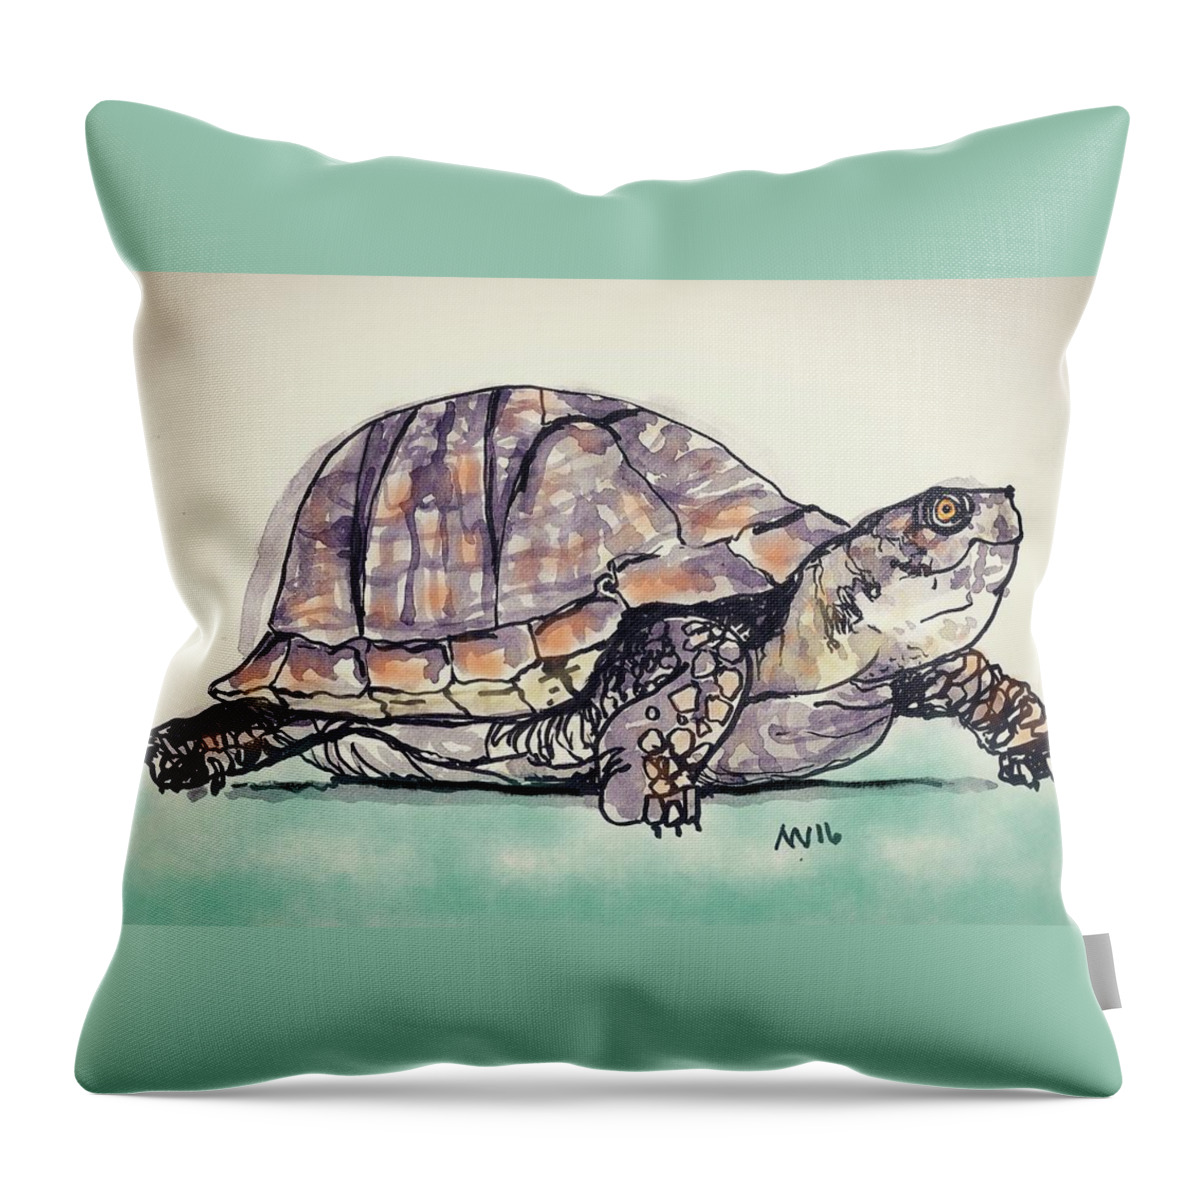 Turtle Throw Pillow featuring the digital art Turtle by AnneMarie Welsh